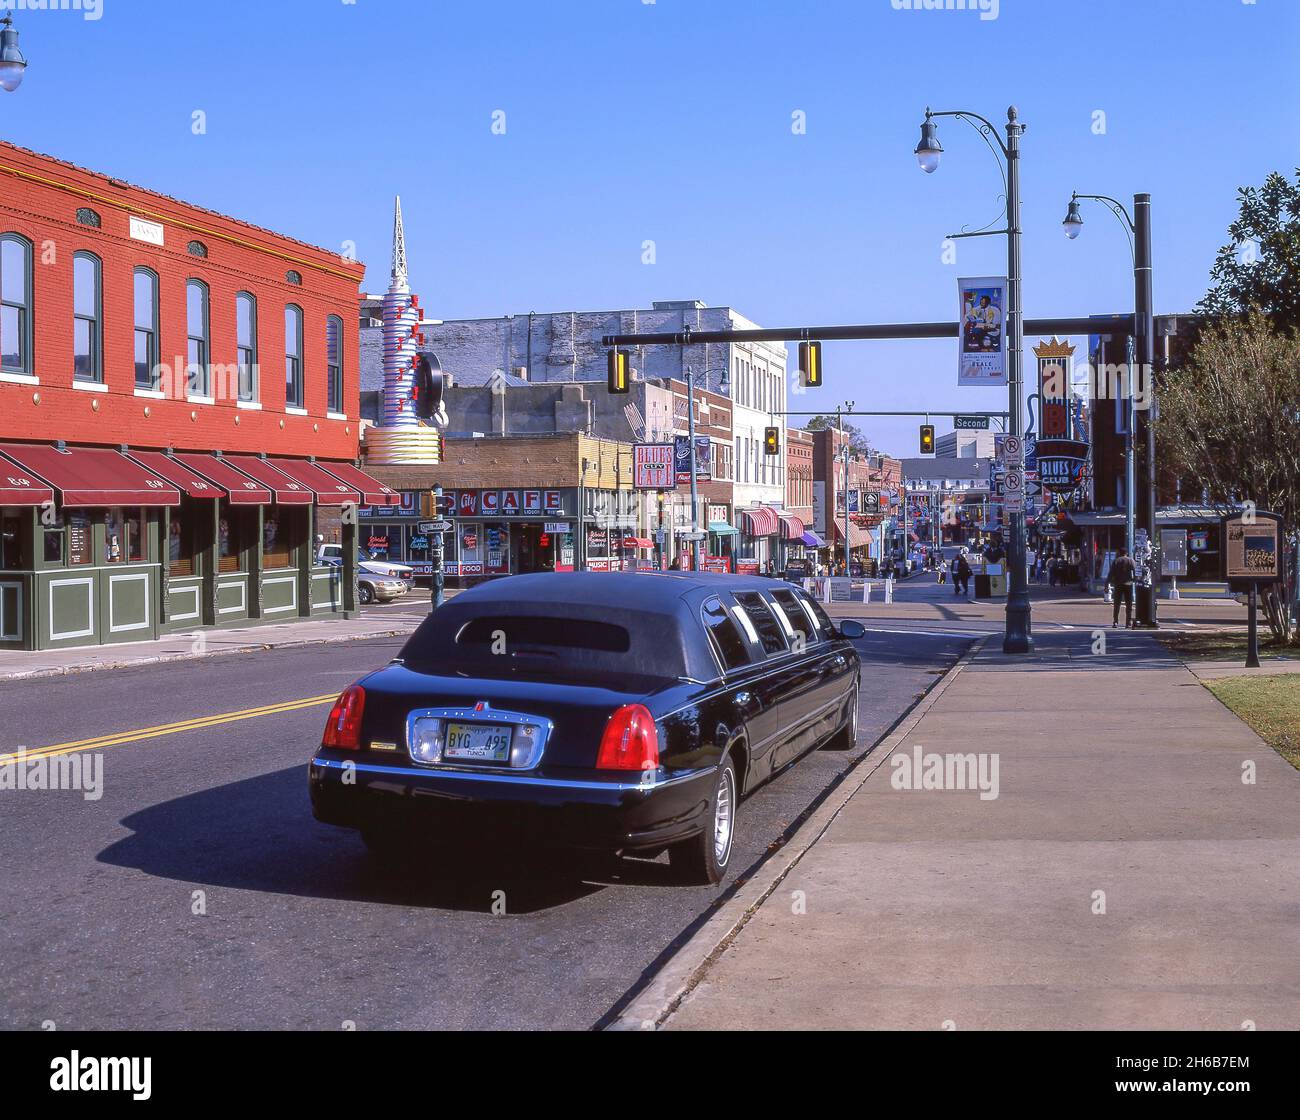 Street scene showing limousine, Beale Street, Beale Street District, Memphis, Tennessee, United States of America Stock Photo